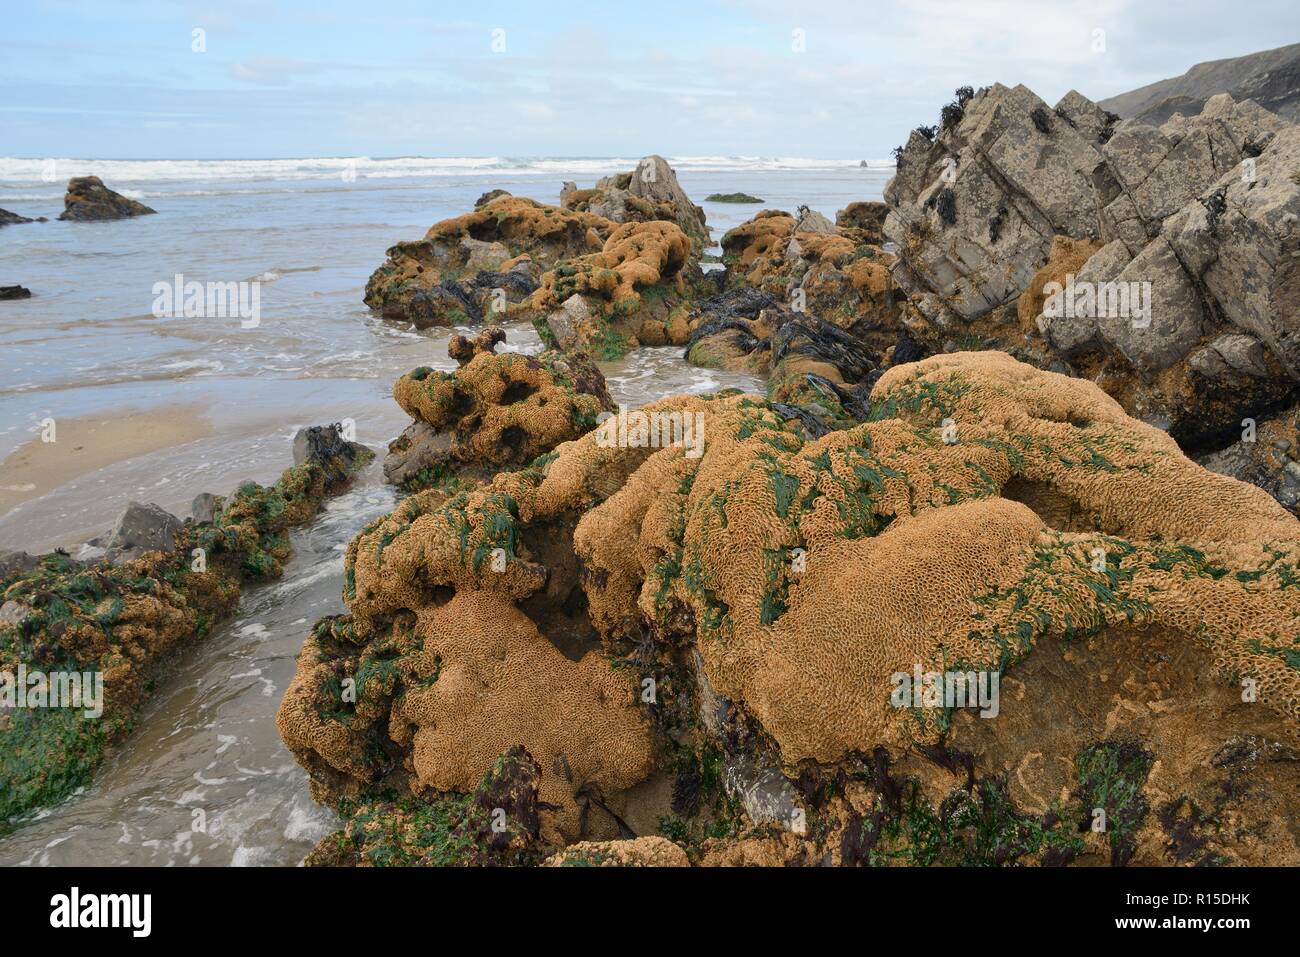 Honeycomb worm reef (Sabellaria alveolata) with clustered tubes built of sand grains on boulders, exposed at low tide, Duckpool Beach, Cornwall, UK Stock Photo